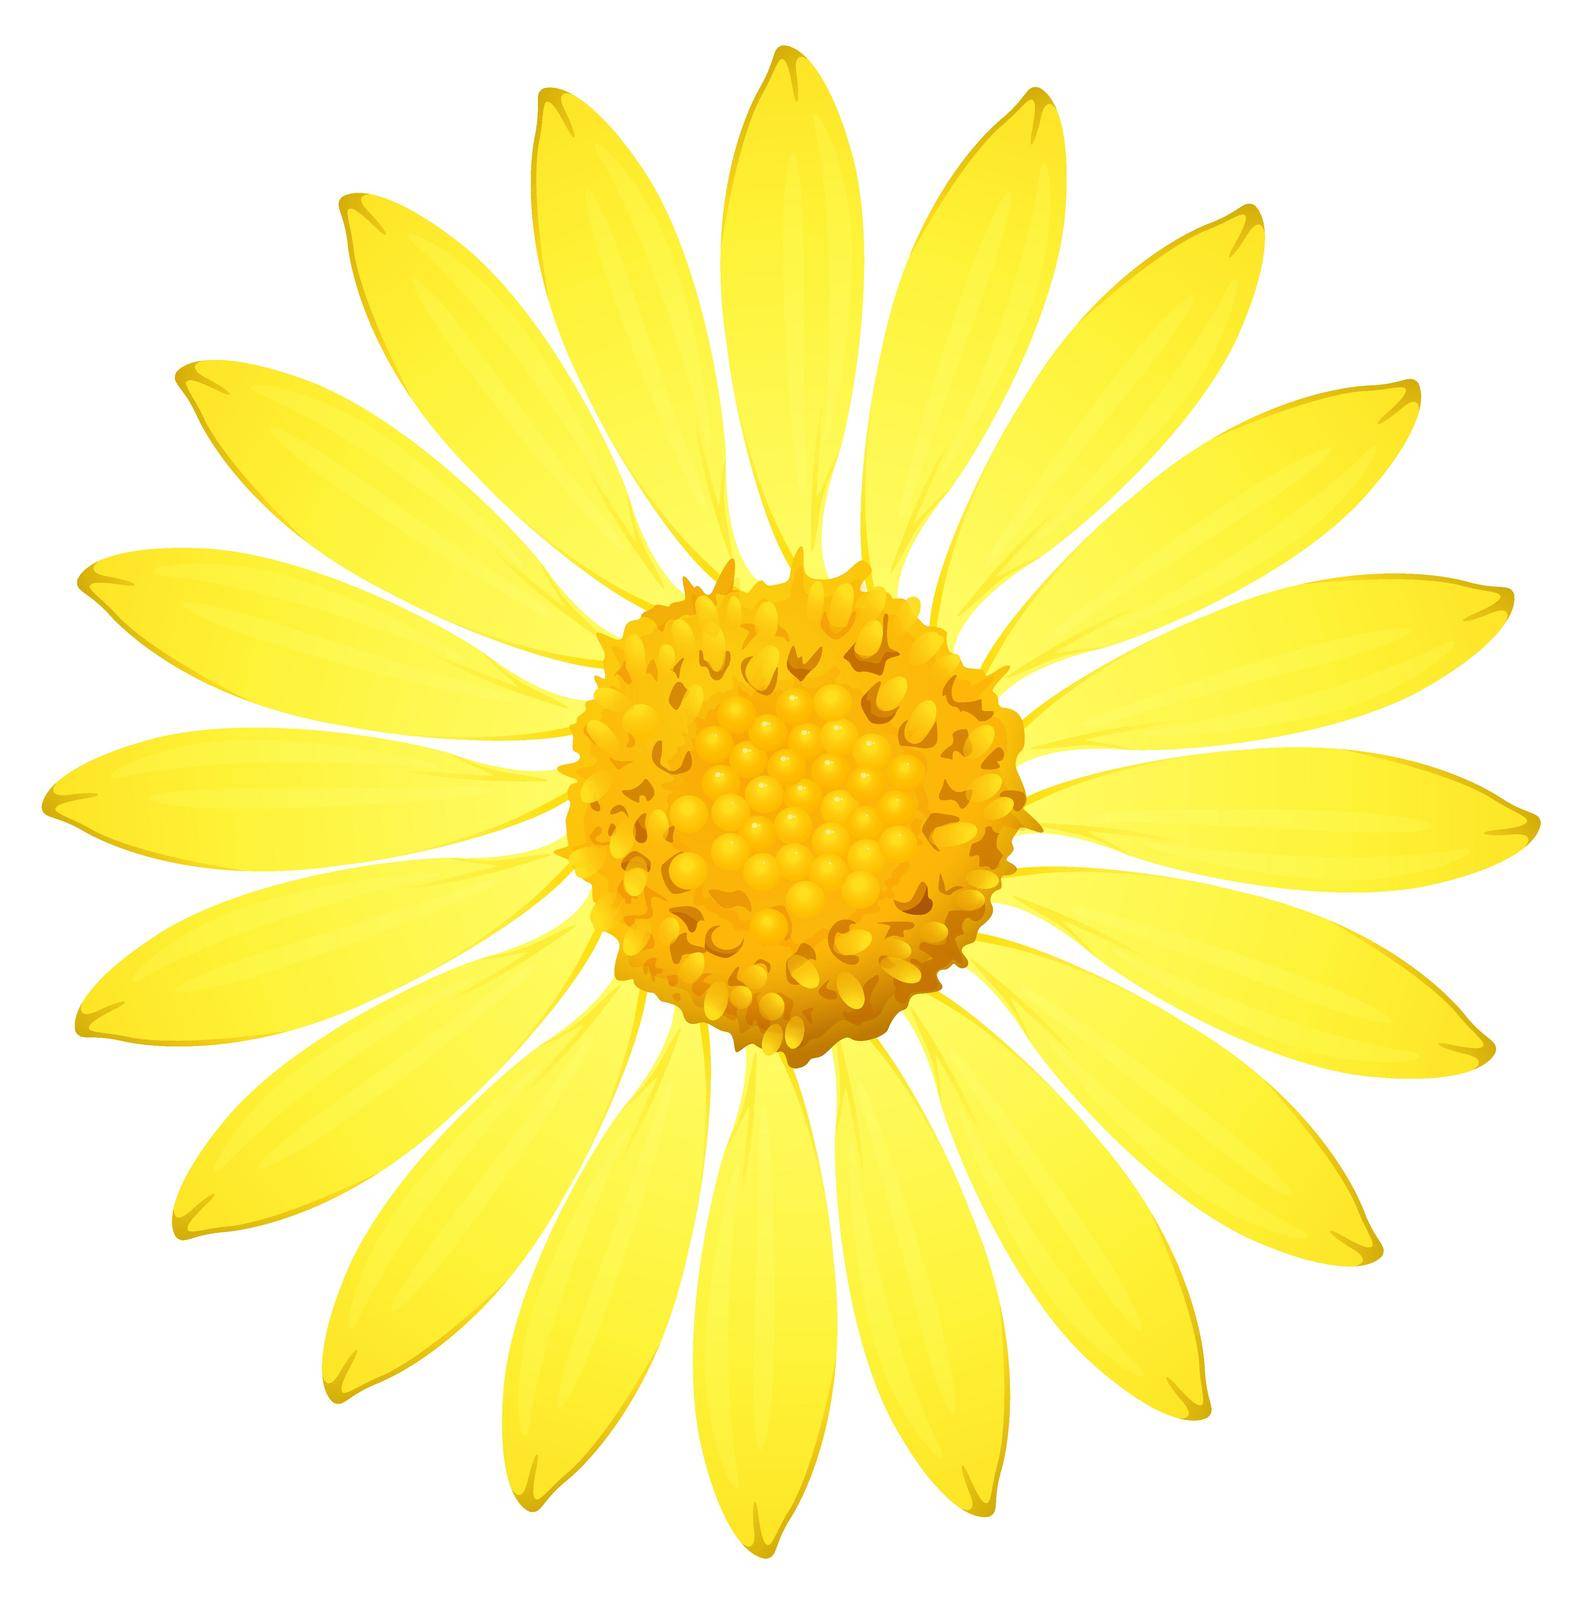 A yellow sunflower on a white background